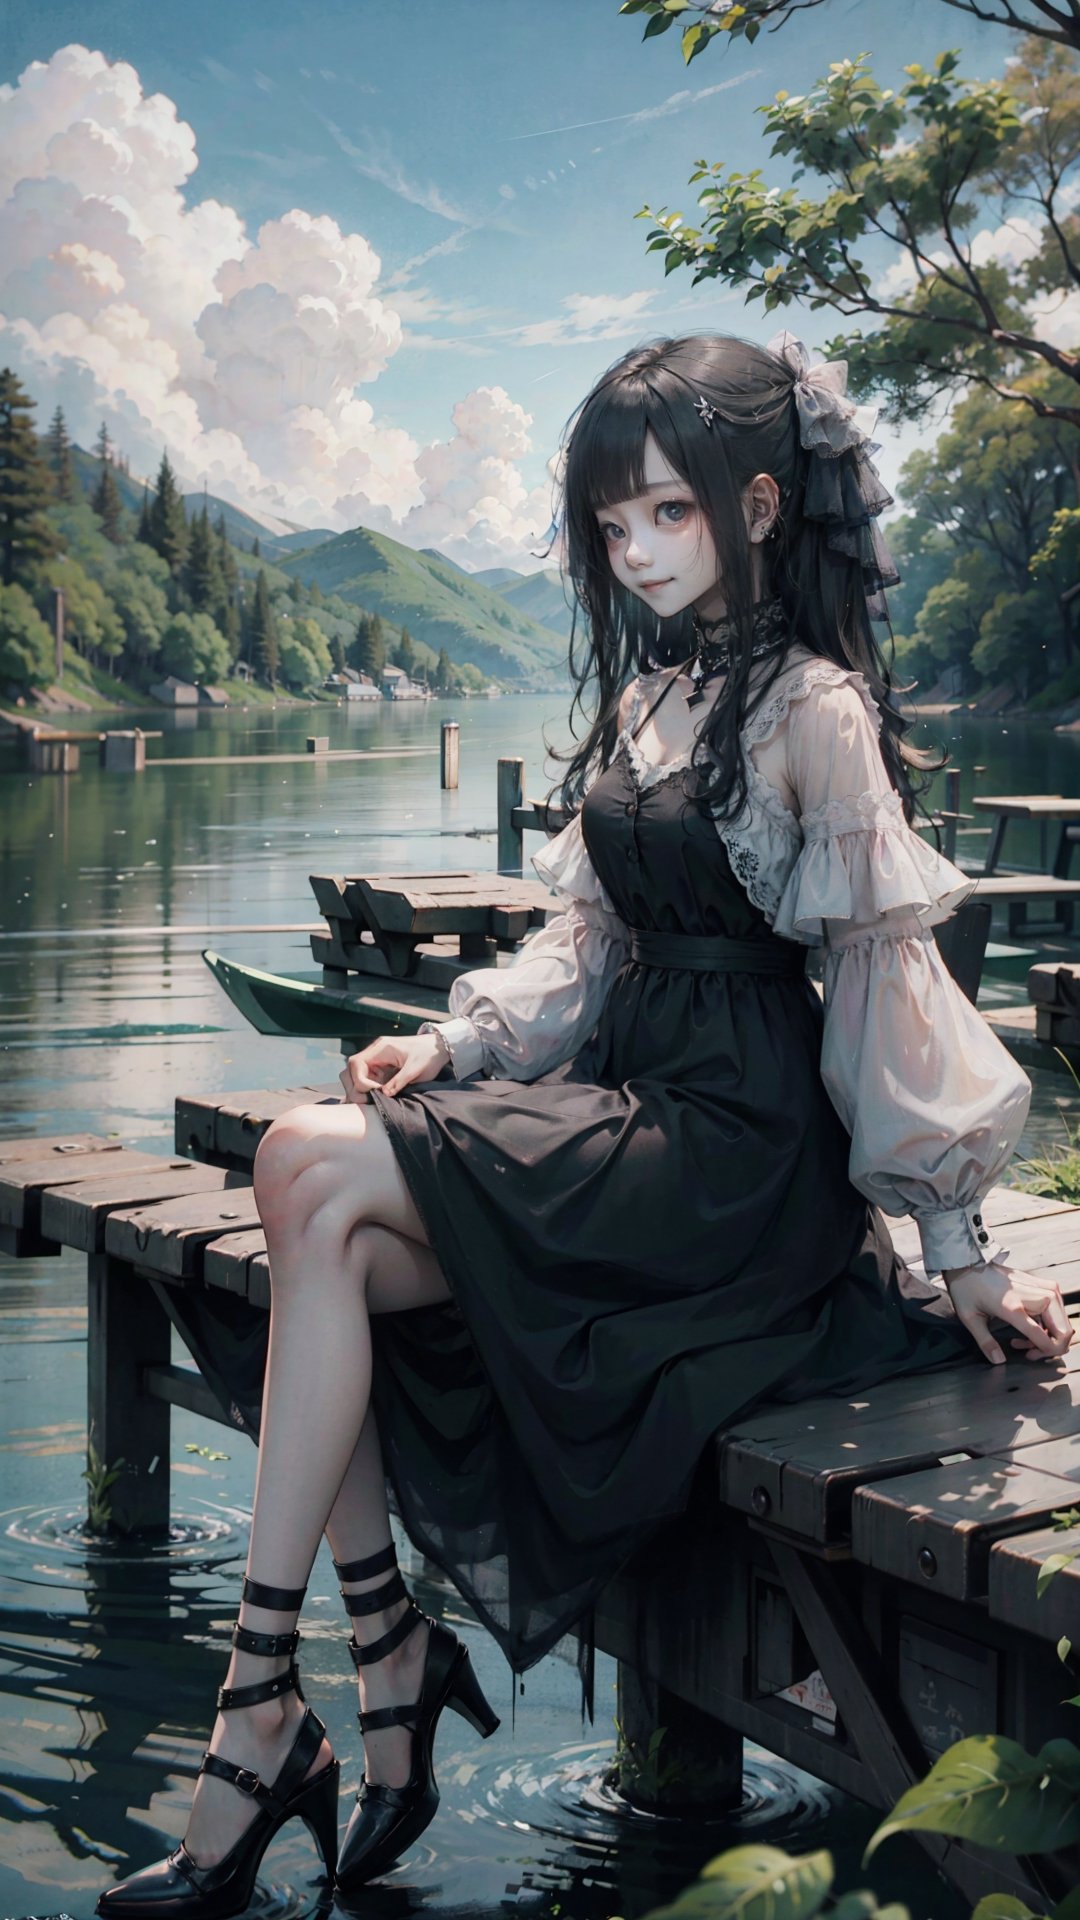 In the image, there is a cute anime girl sitting by a lake. She has long black hair and blue eyes. She is wearing a pink dress and shoes. The sky is blue with white clouds and there are green trees around the lake.